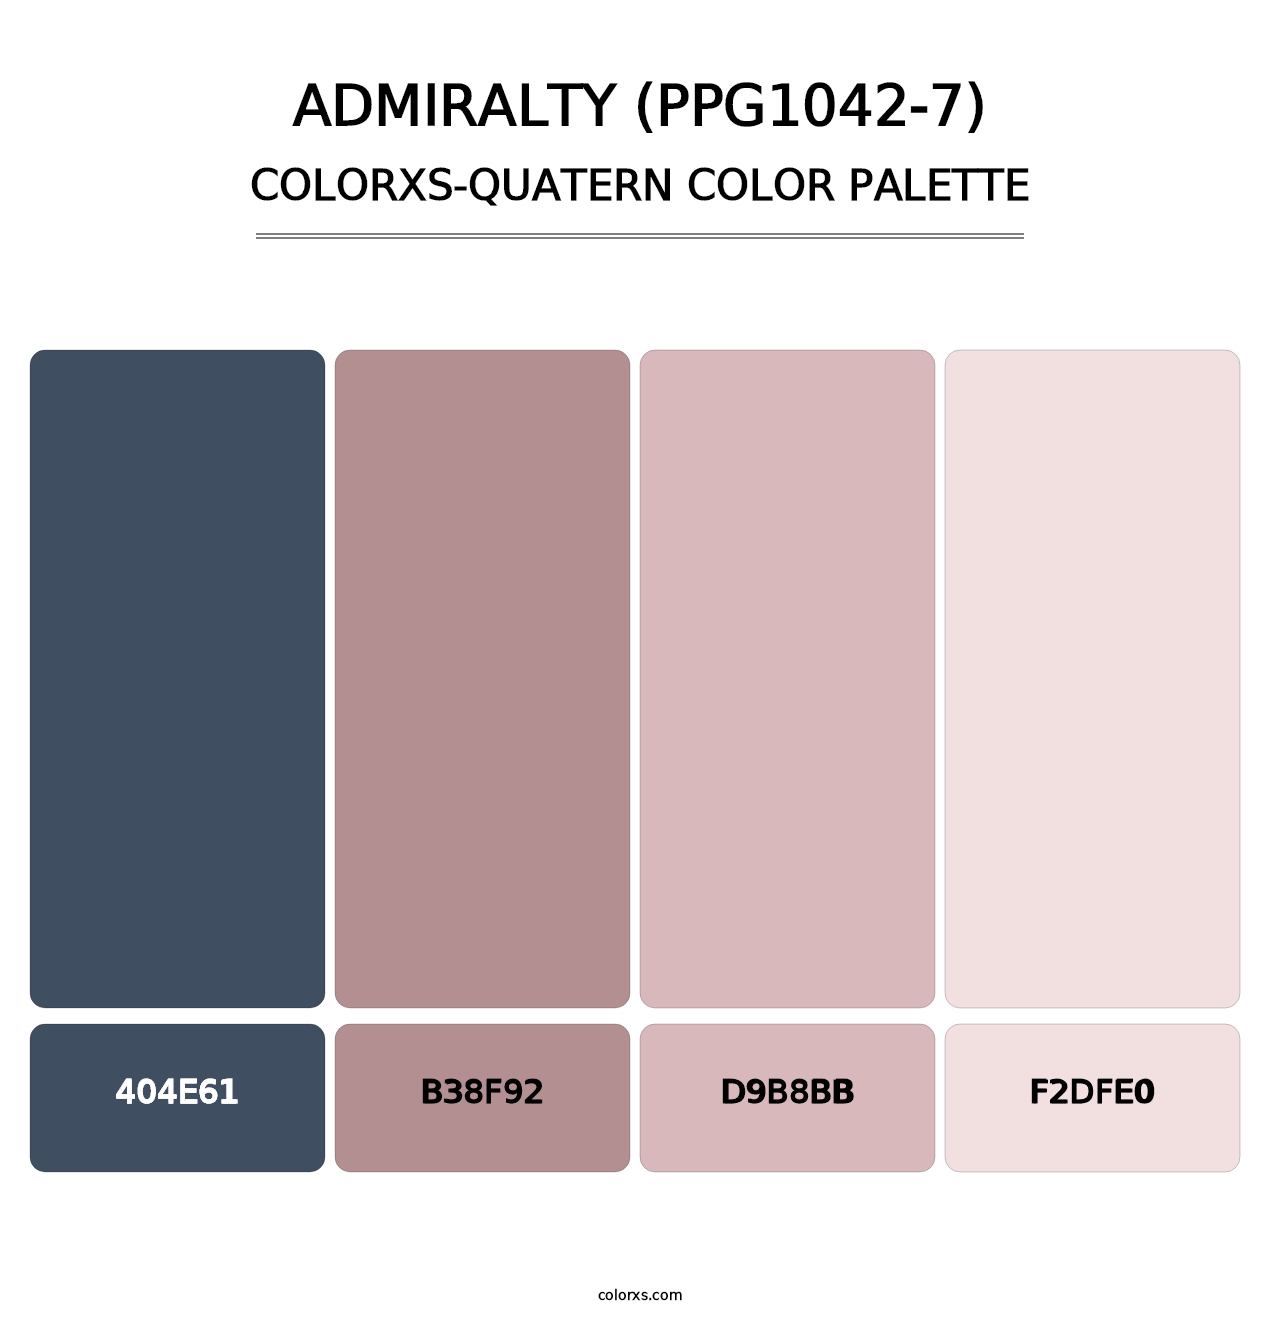 Admiralty (PPG1042-7) - Colorxs Quatern Palette